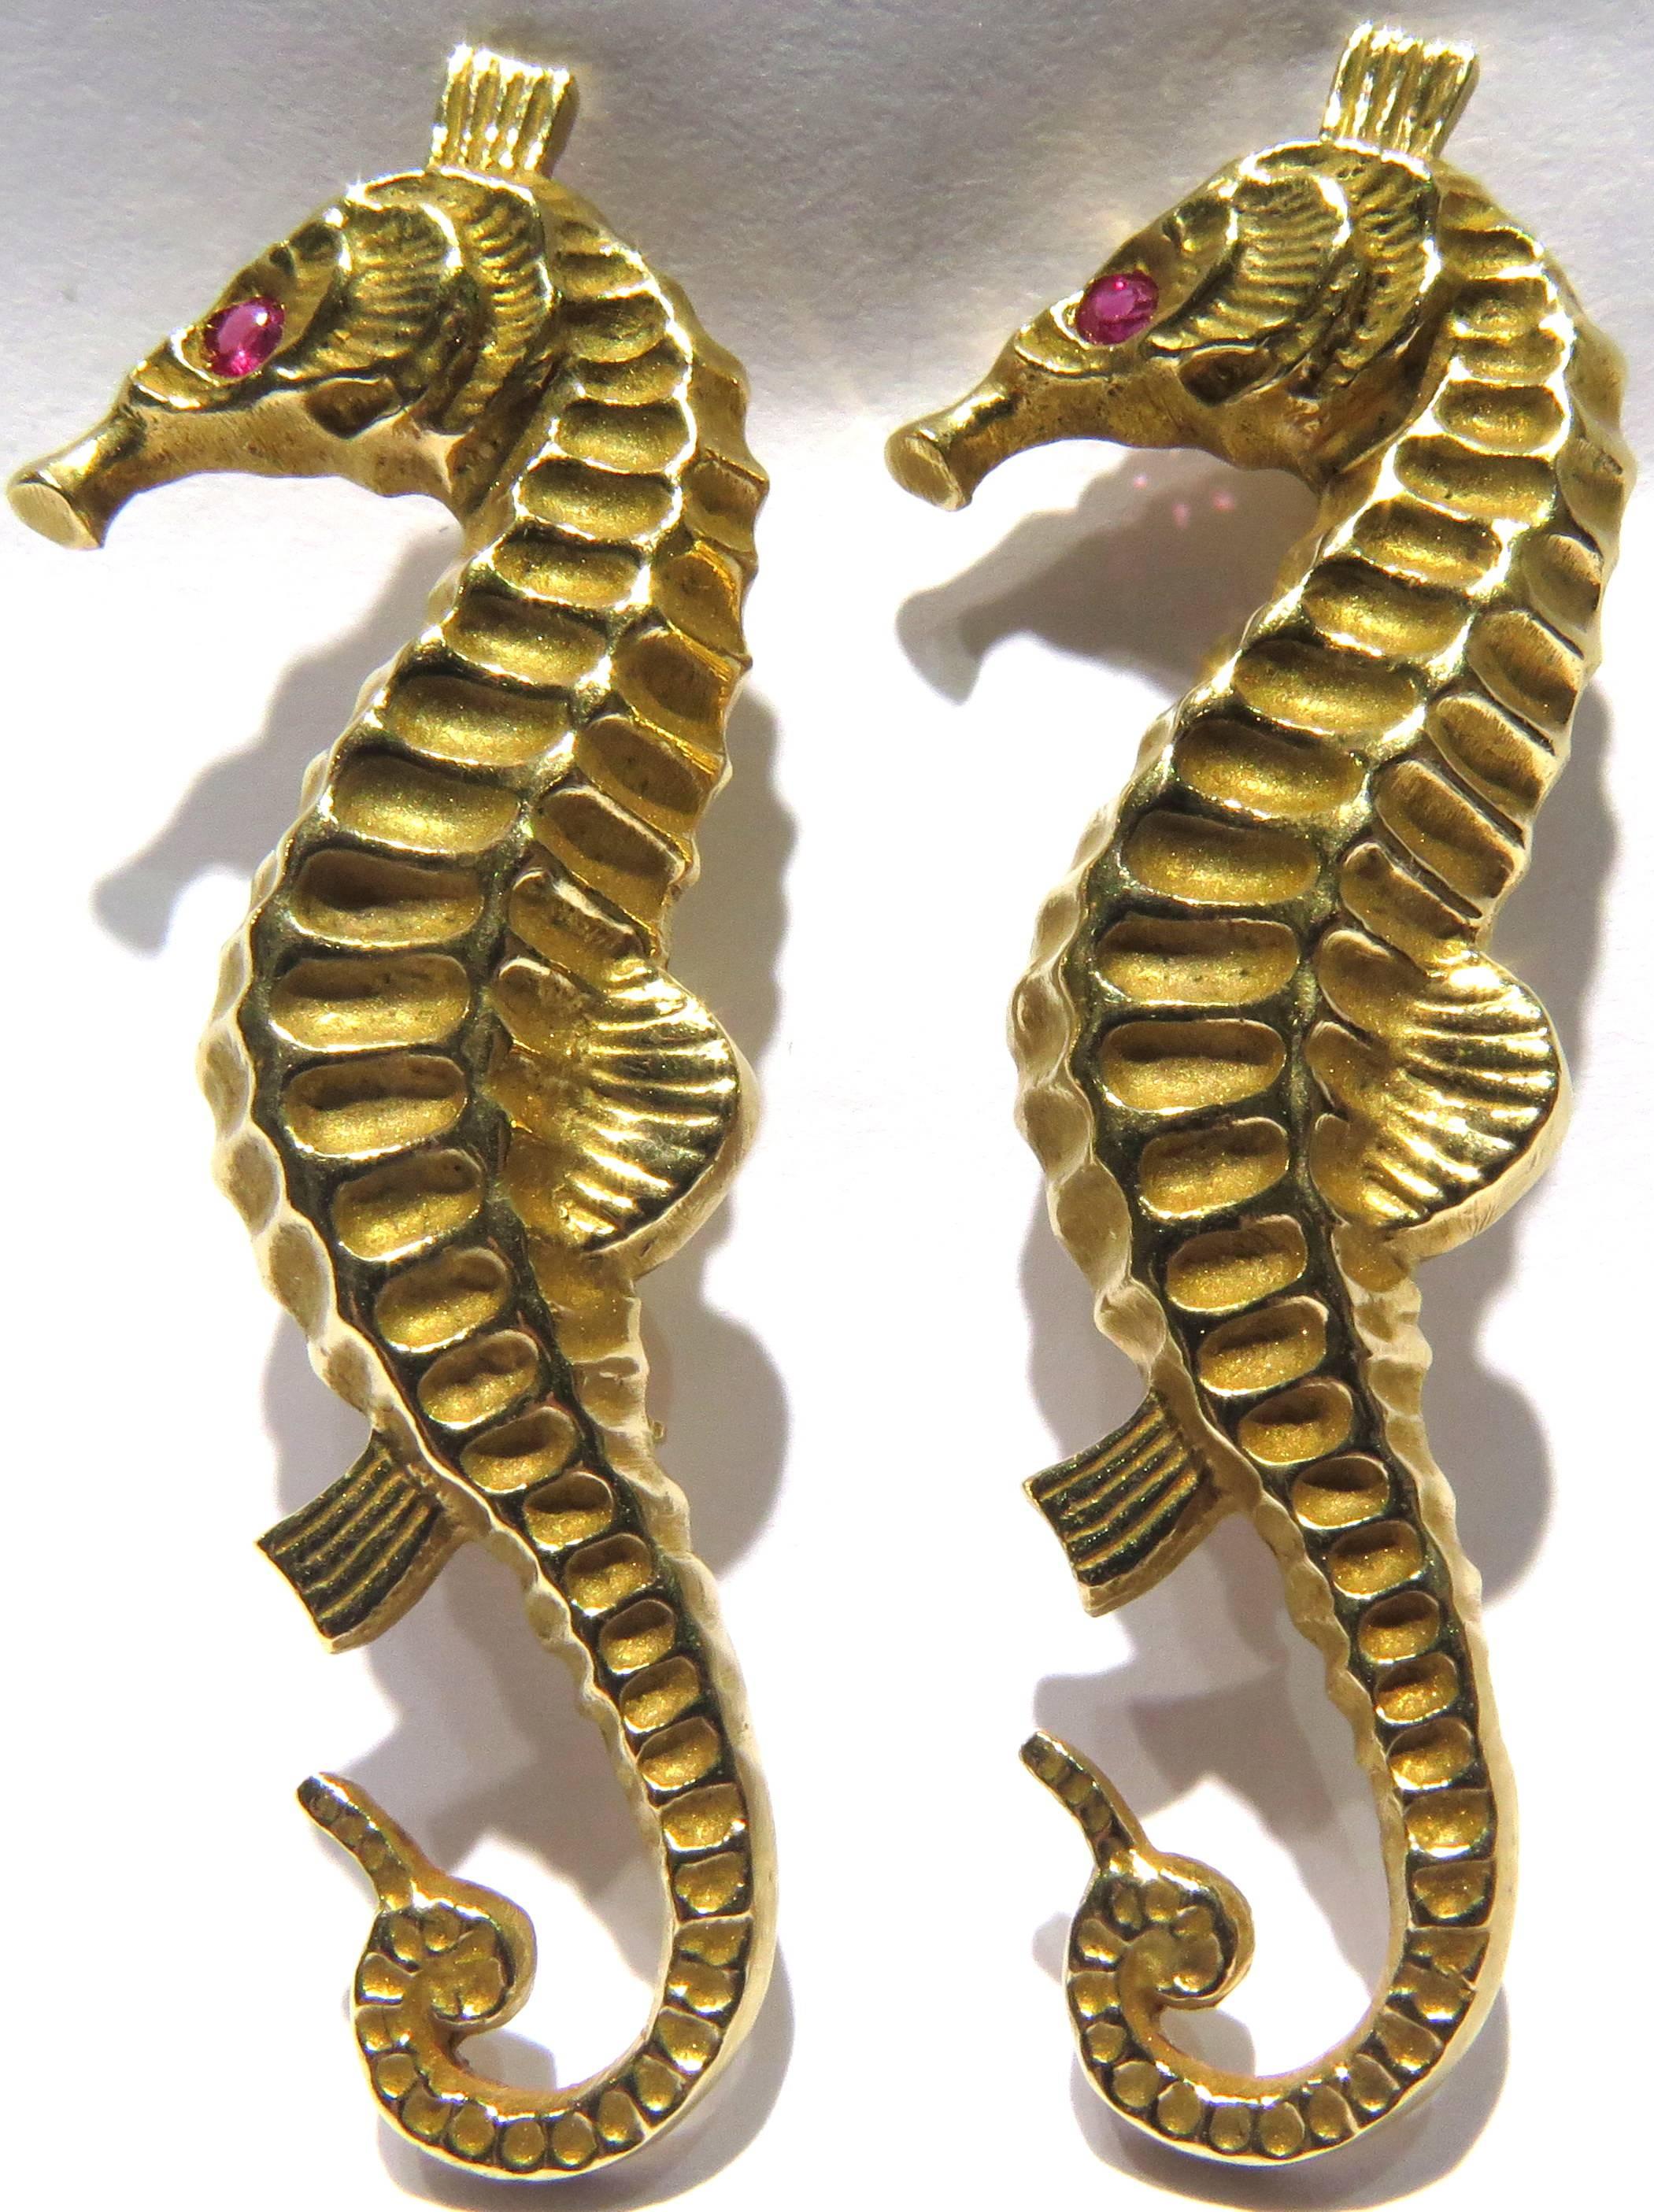 This pair of incredibly detailed 14k gold seahorses are so realistic, they are like a sculpture. They are both the same size. Each features 1 faceted ruby eye.
These pins weigh 14.2 grams
Each of the pins separately measure 2 inches high by 2/3 inch